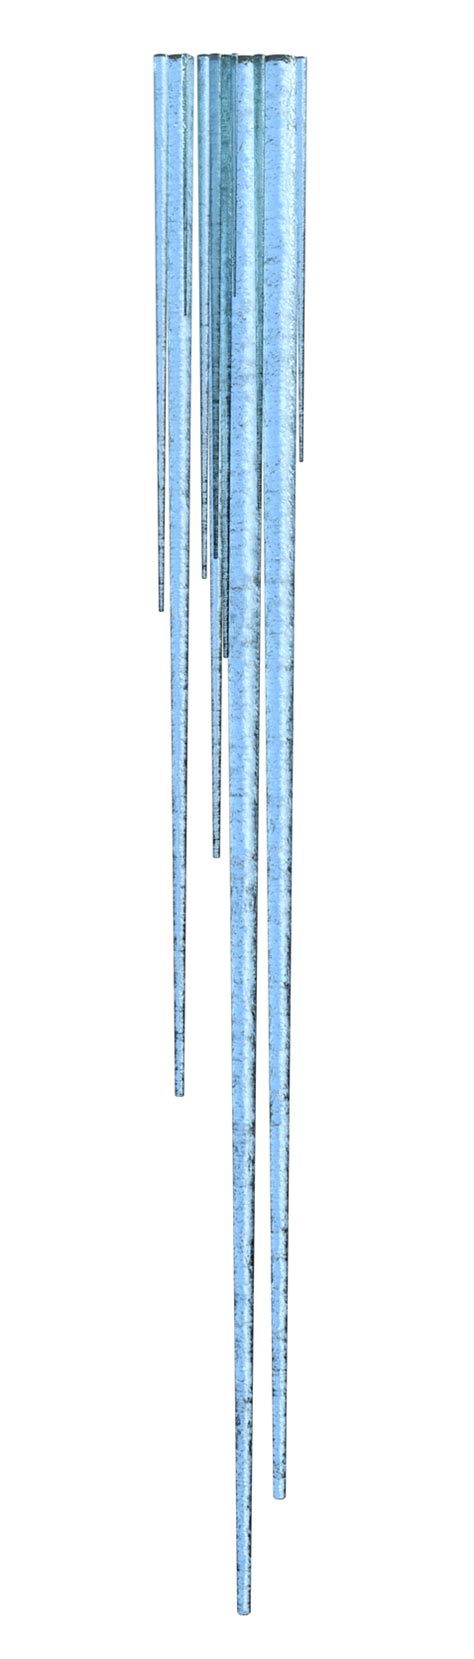 Free Icicle 4 Png Overlay By Lewis4721 On Deviantart